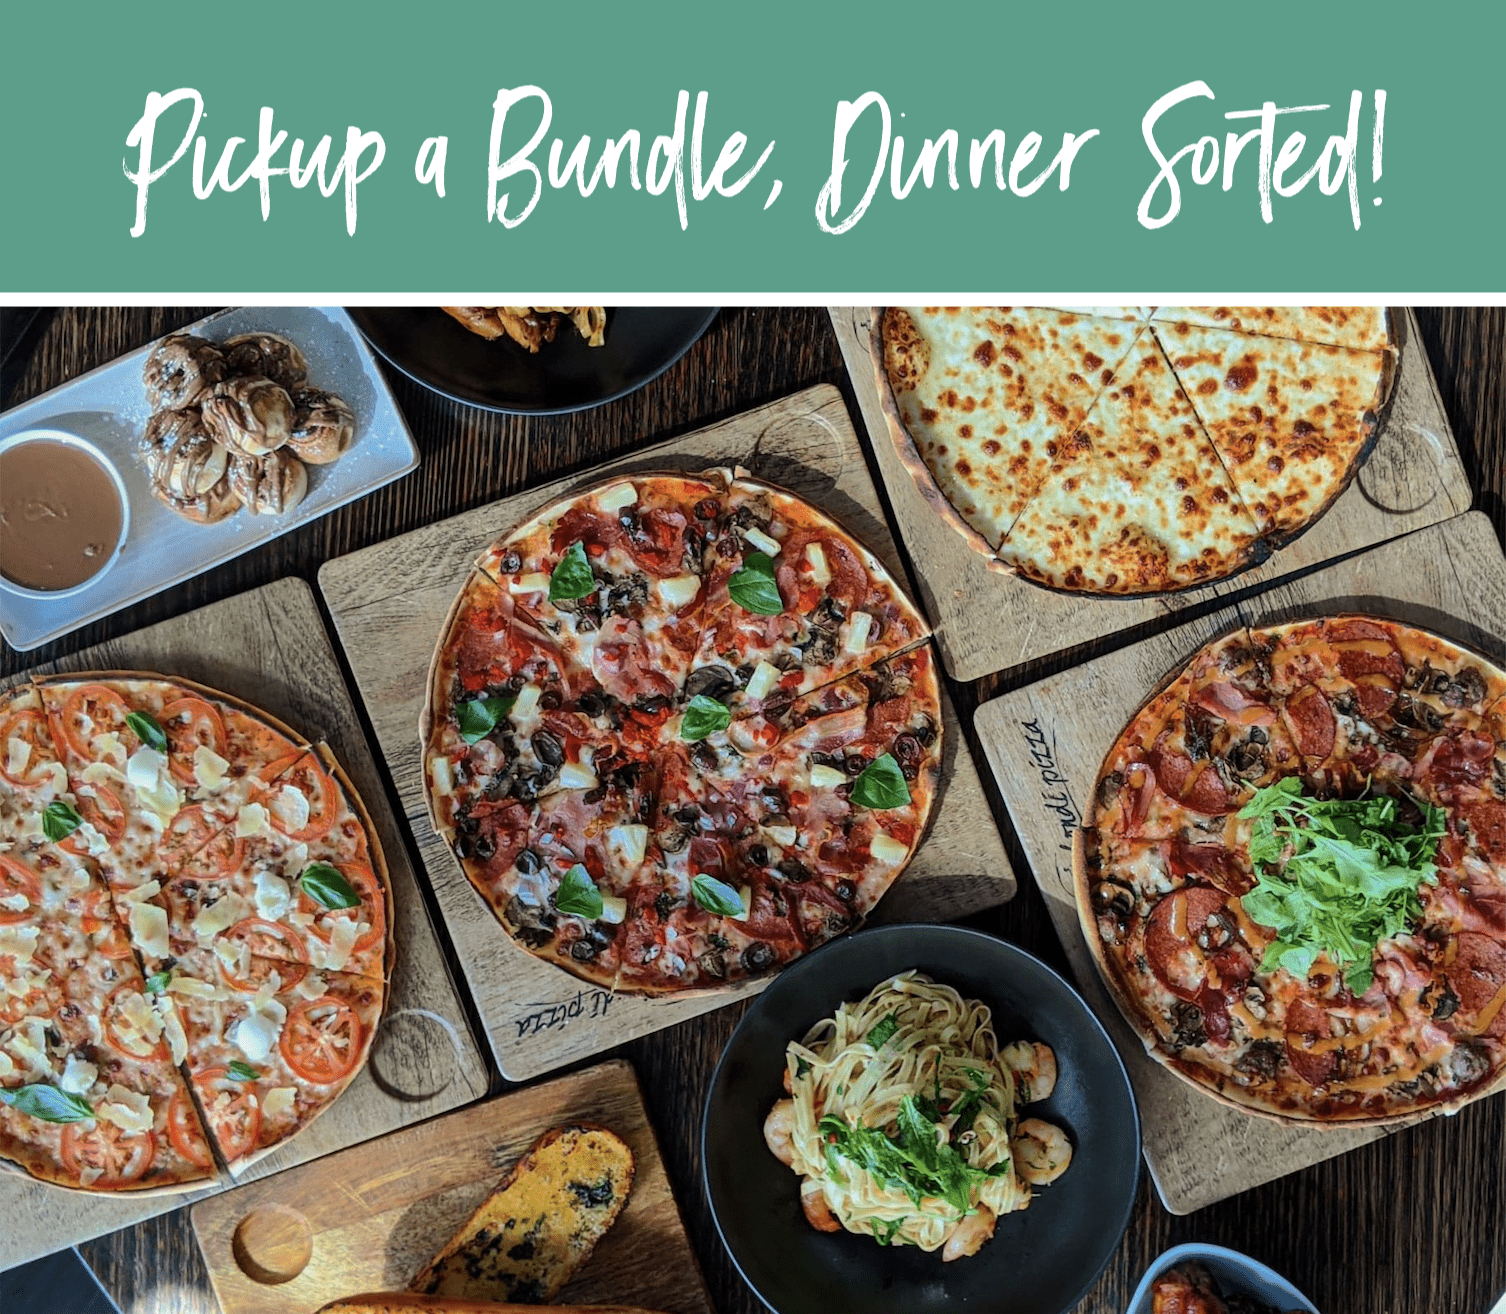 DEAL: Bondi Pizza - Large Classic Pizza, Garlic Bread, Soft Drink Can for $19.95 + More Pickup Bundles 7